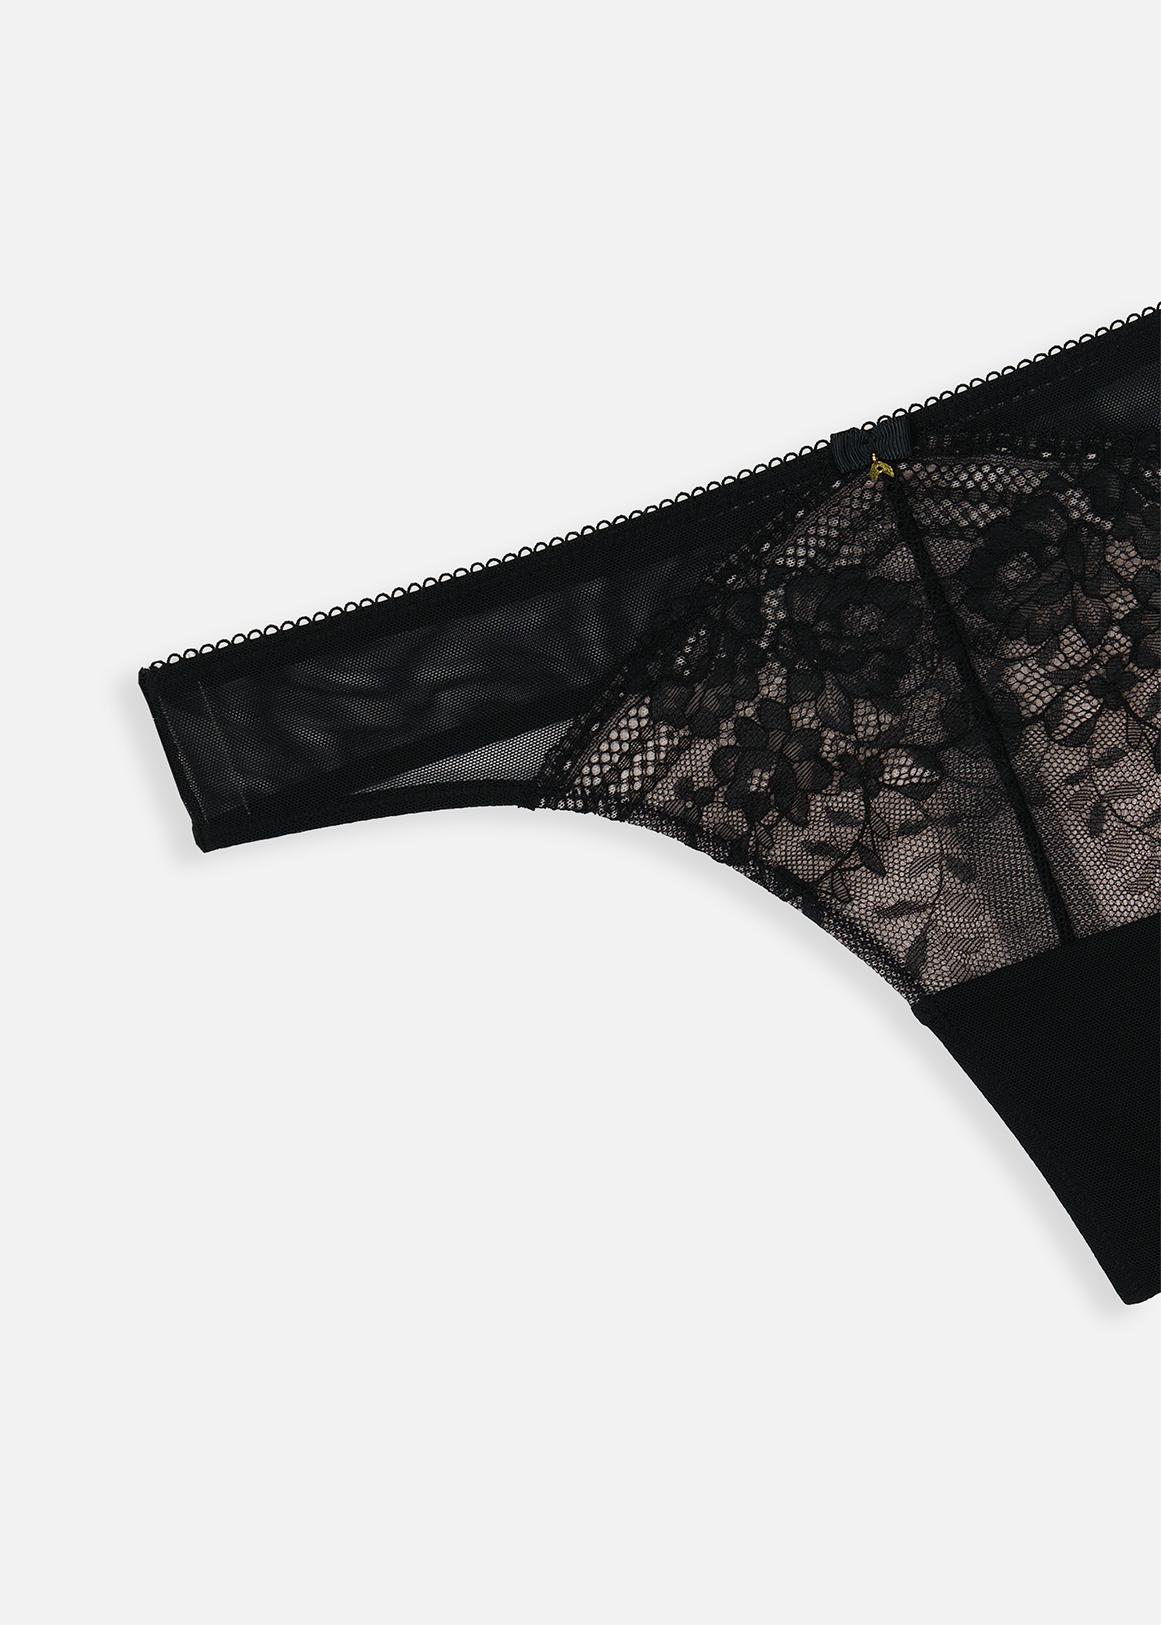 MyRunway  Shop Woolworths Black Sheer Lace G-string for Women from